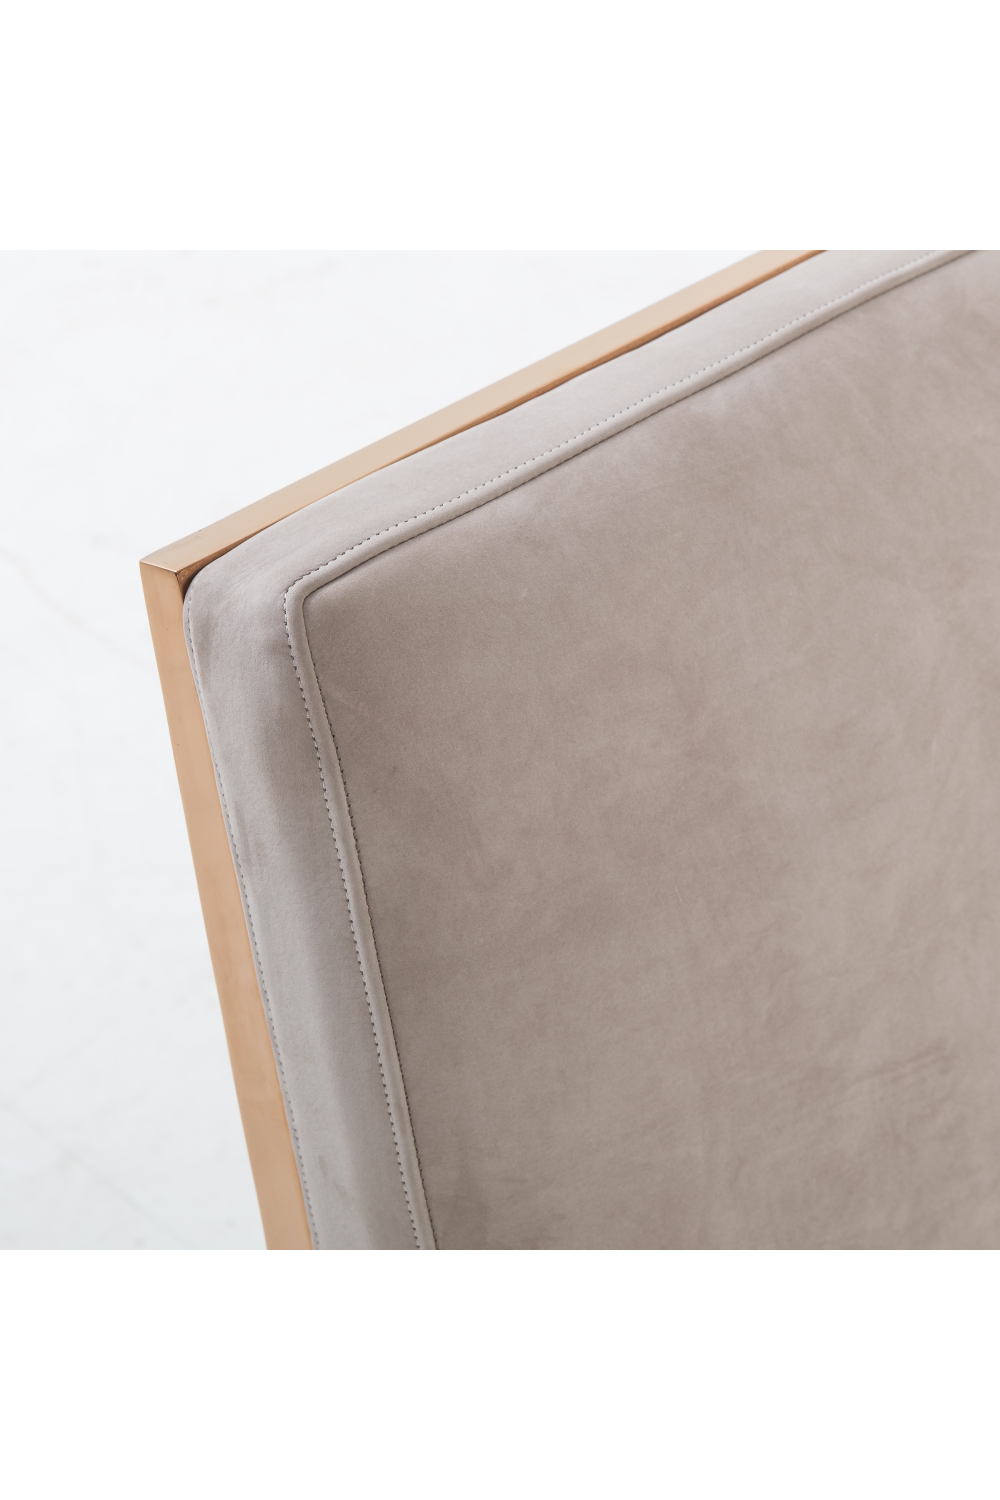 Upholstered Suede Lounge Chair | Andrew Martin Marley| Oroa.com